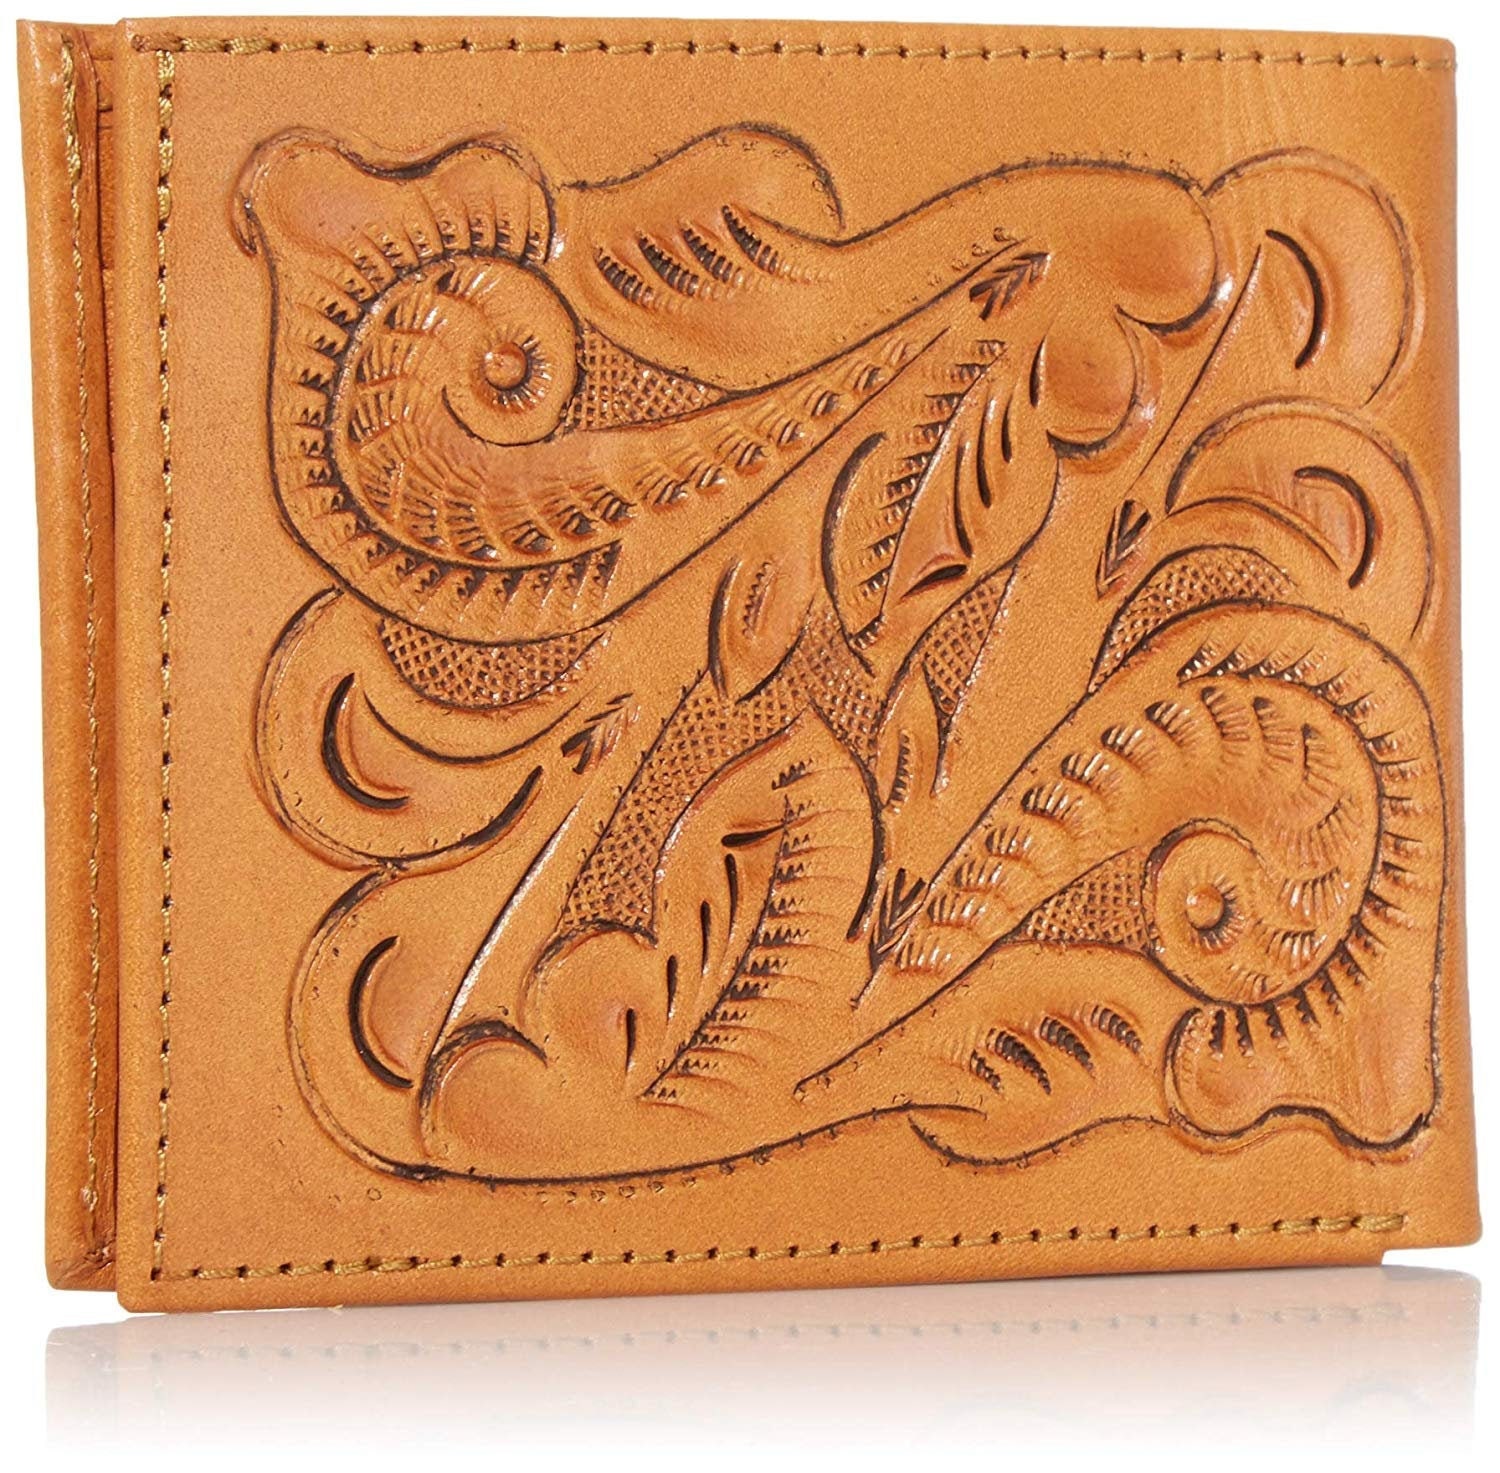 Nocona Men's Tooled leather Trifold Western Wallet